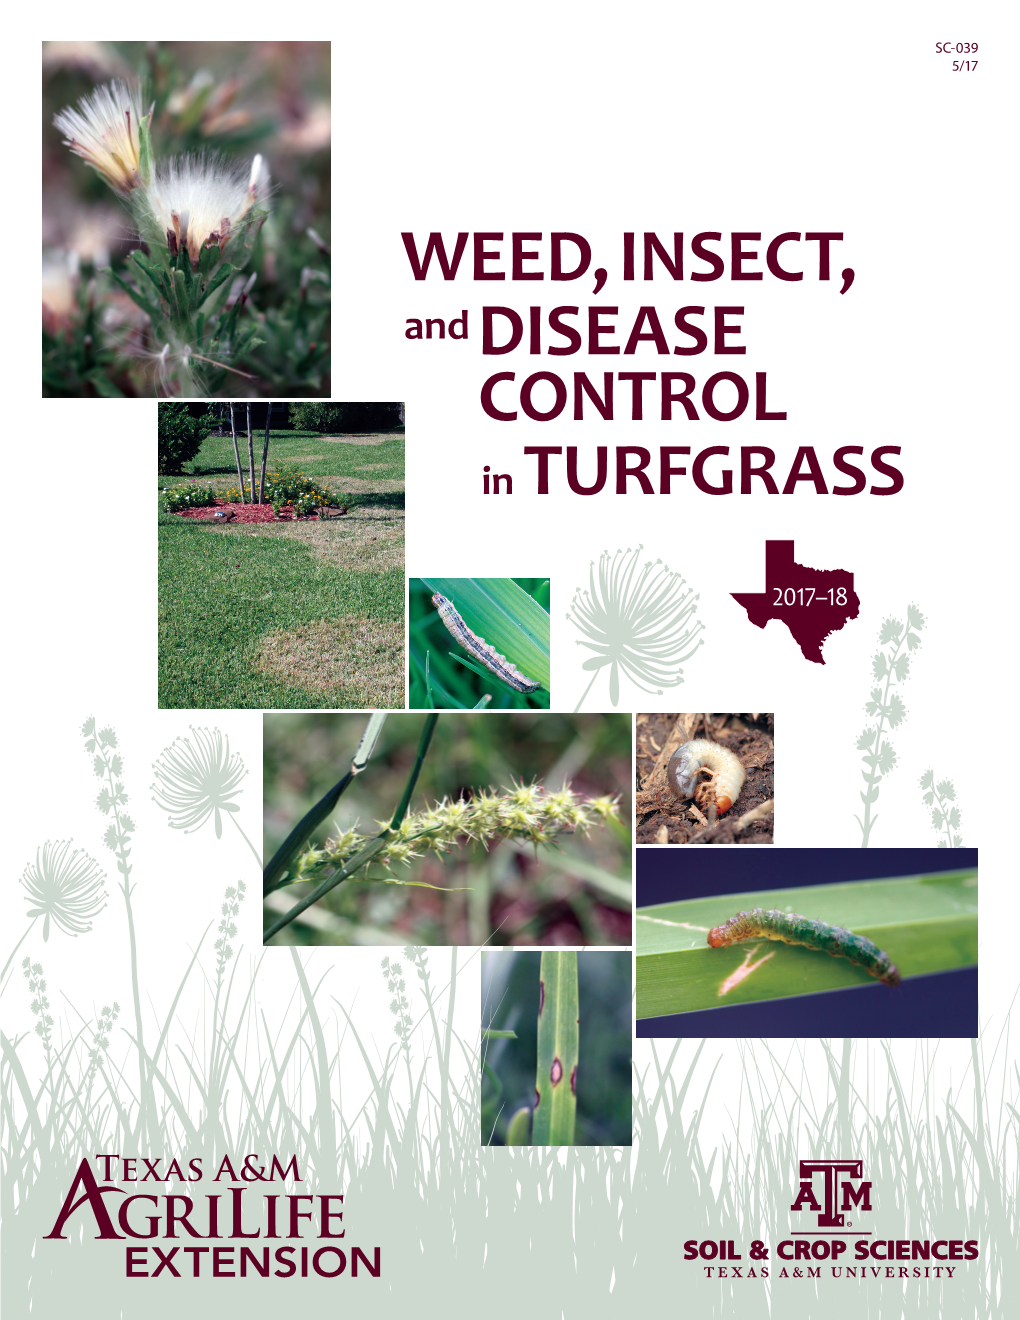 INSECT, WEED, Anddisease CONTROL in TURFGRASS